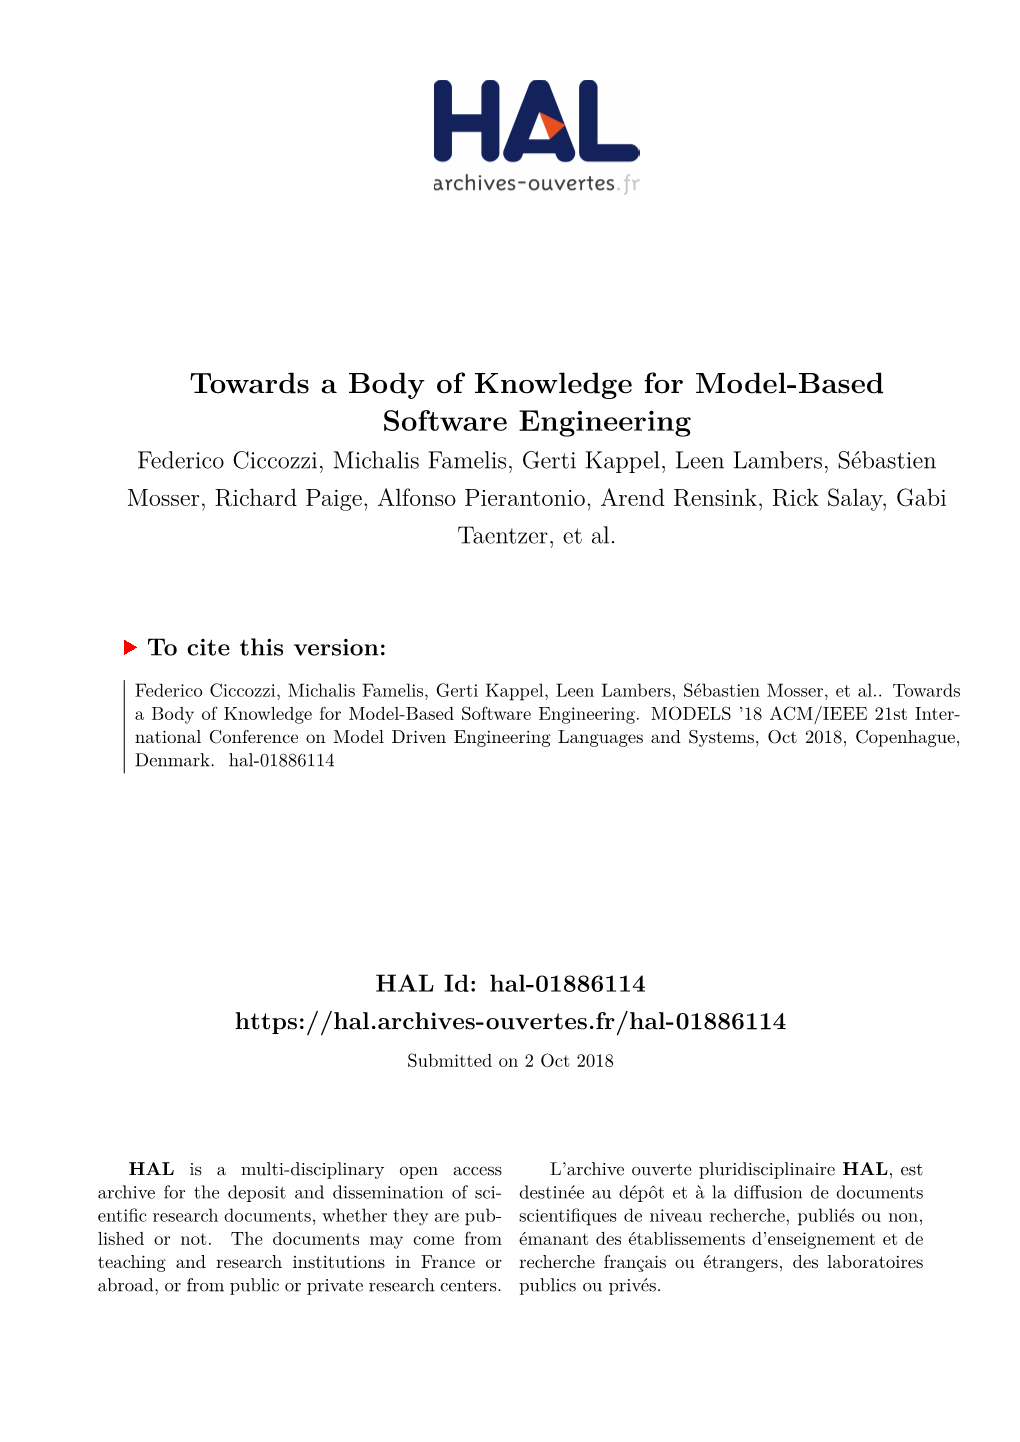 Towards a Body of Knowledge for Model-Based Software Engineering